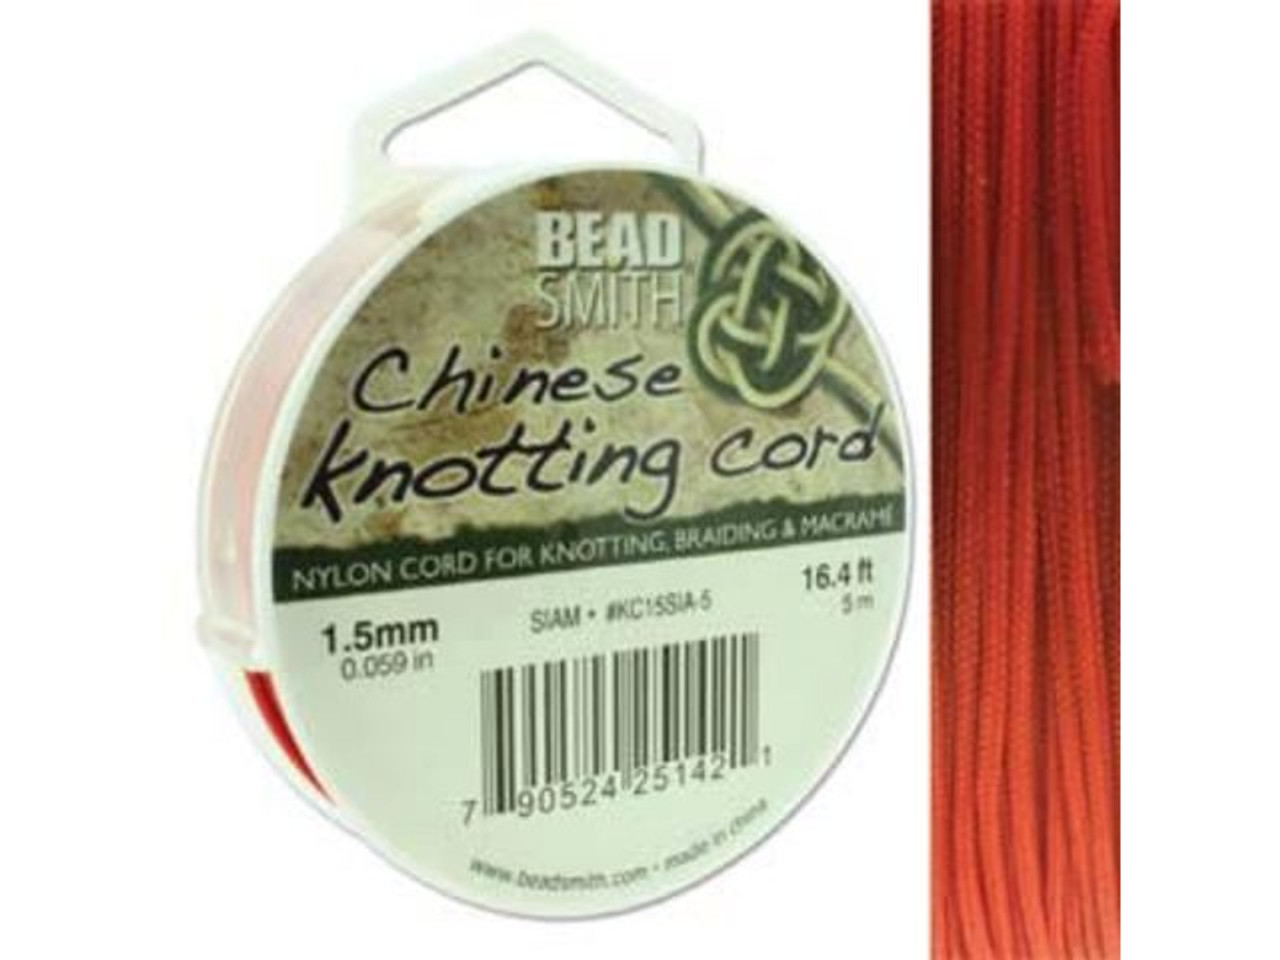 61-575-05 Chinese Knotting Cord, 1.5mm, Siam - Rings & Things